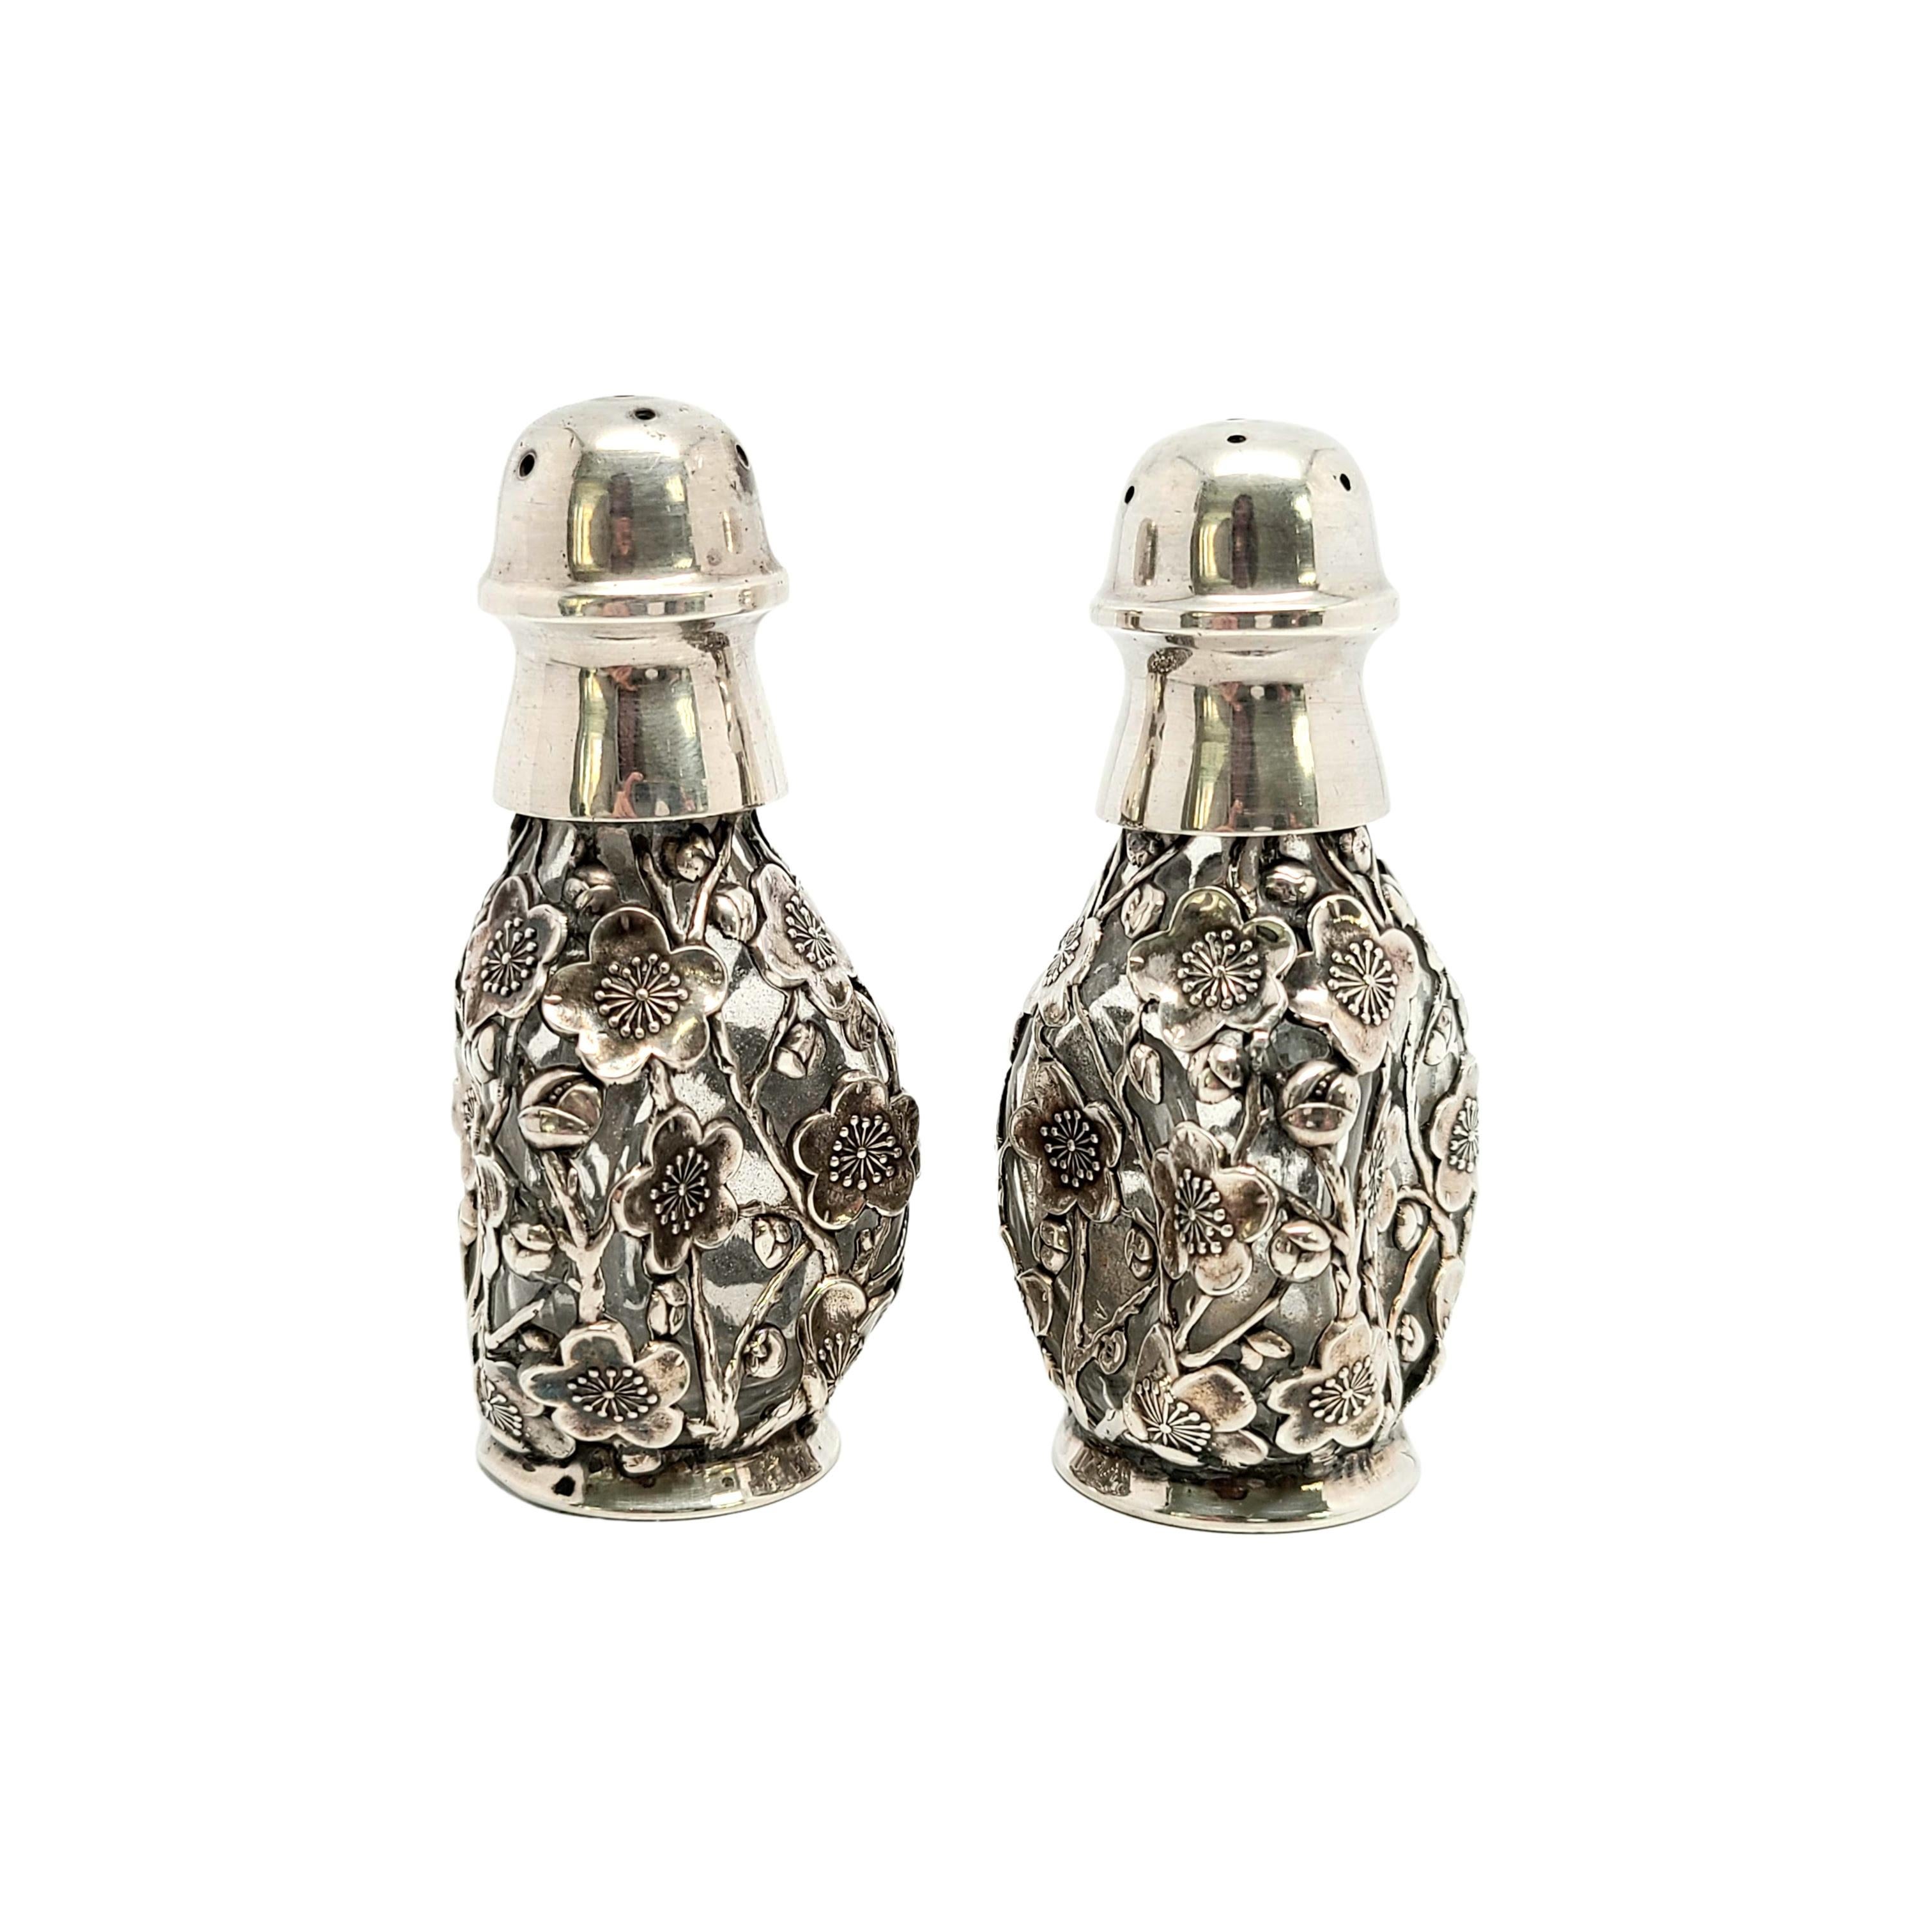 Vintage 950 sterling silver and glass salt and pepper shakers from Japan.

Pair of triangular shaped salt and pepper shakers with a 950 pure sterling silver cherry blossom design over glass.

Measures approx 3